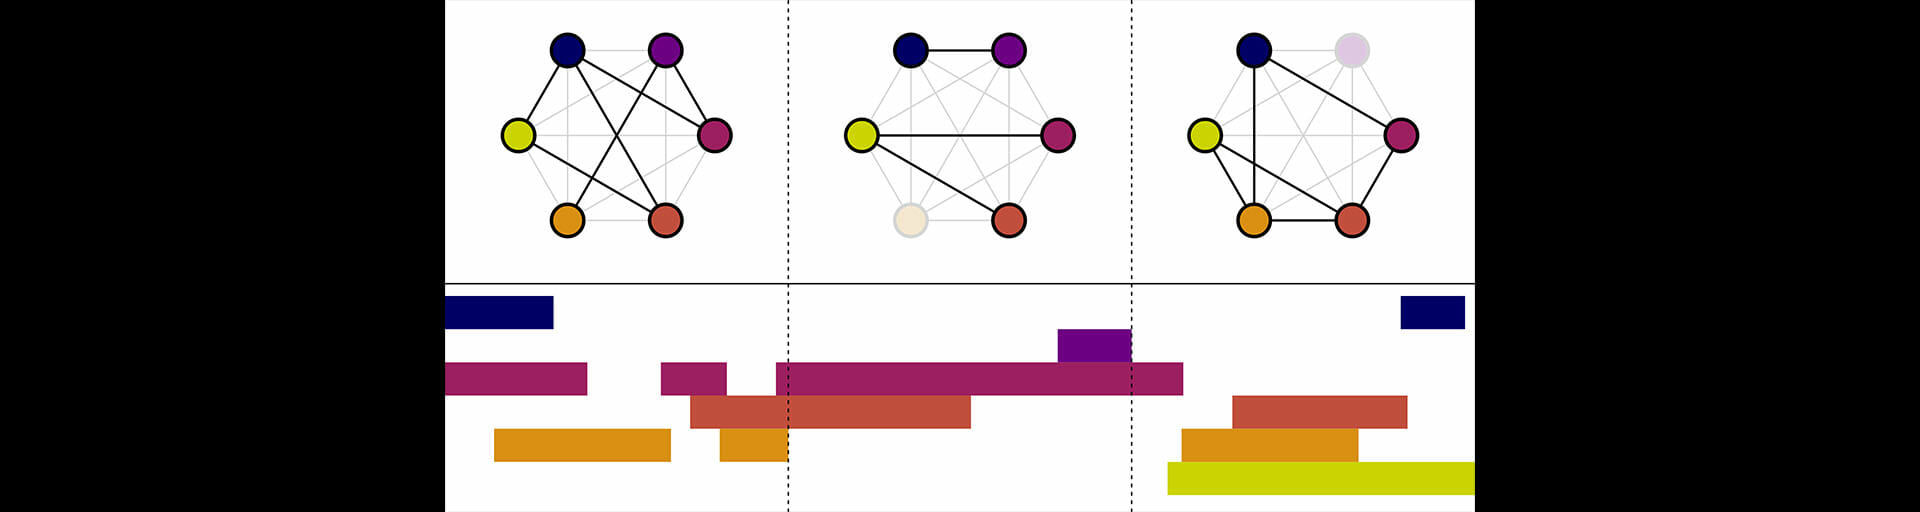 An illustration of a dynamic network whose members and connections change over time. This research will study the challenging setting where members' actions (colored bars) are concurrent with topological changes (dotted lines).